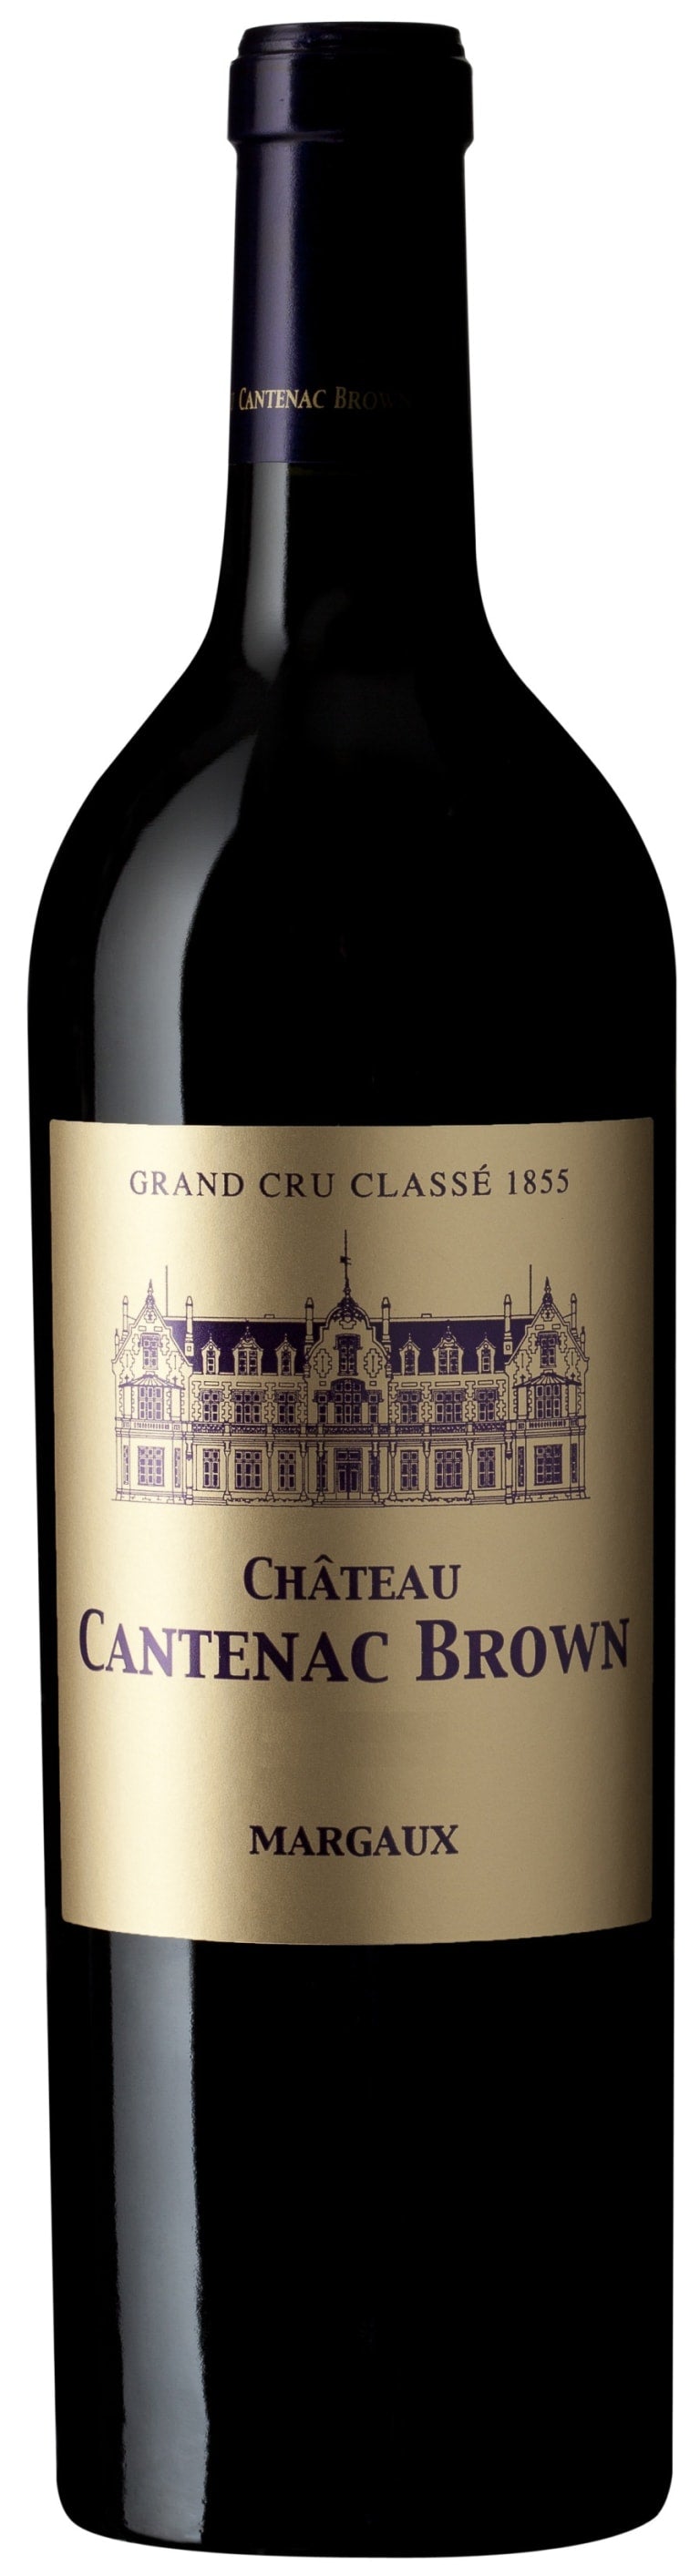 Chateau Cantenac Brown Margaux 2019